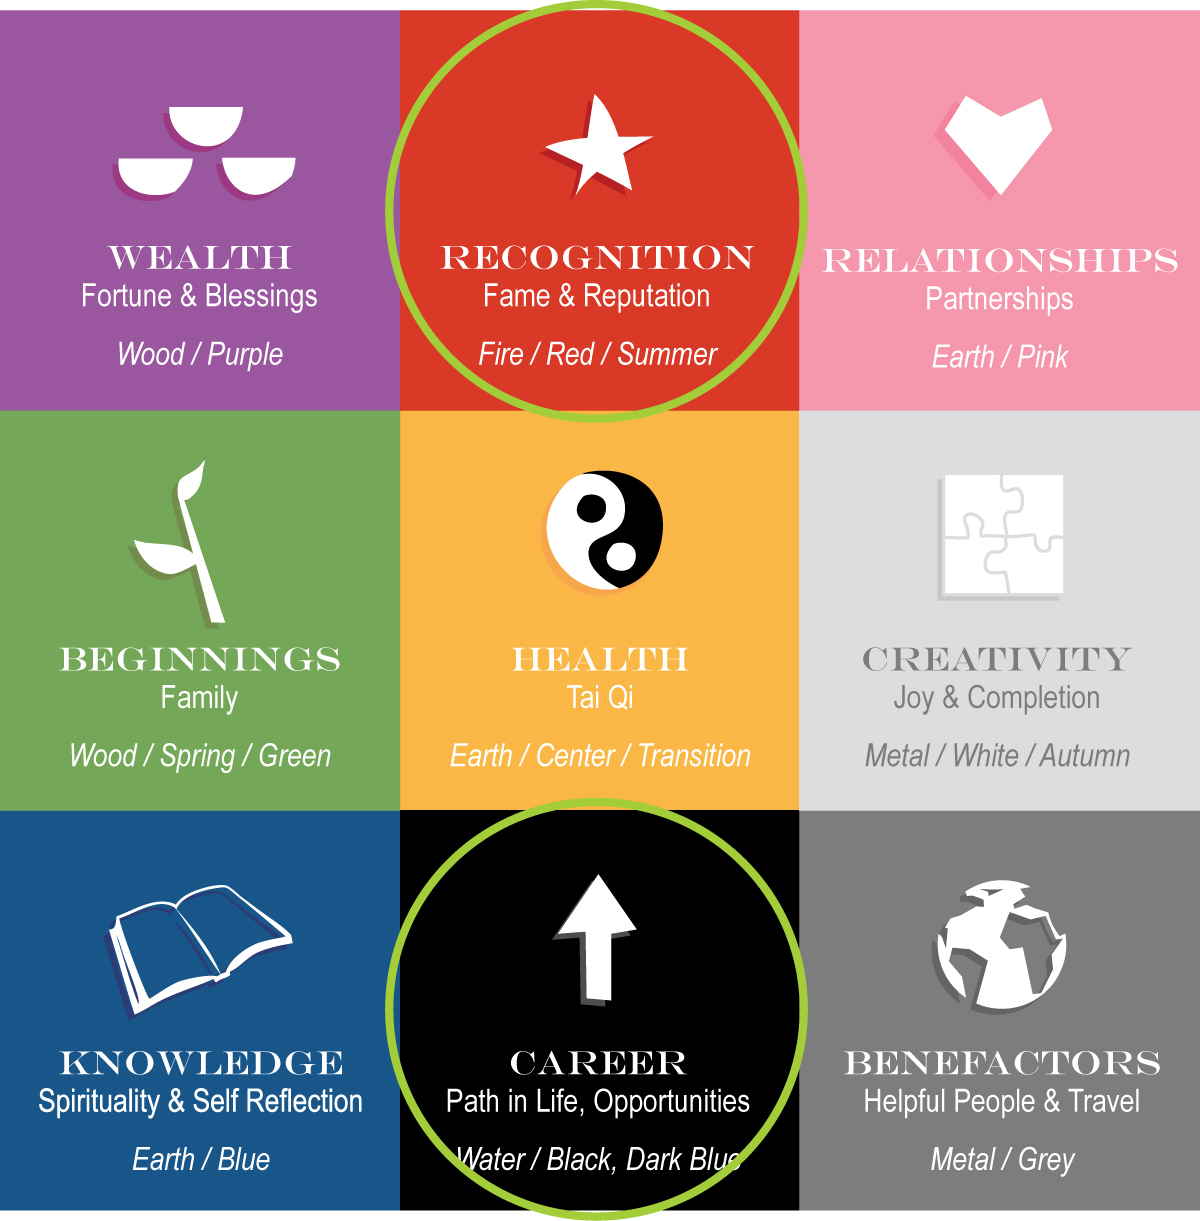 To find your Career, Fame/Reputation sections of your space, align this bagua with your front door. image: Feng Shui Creative